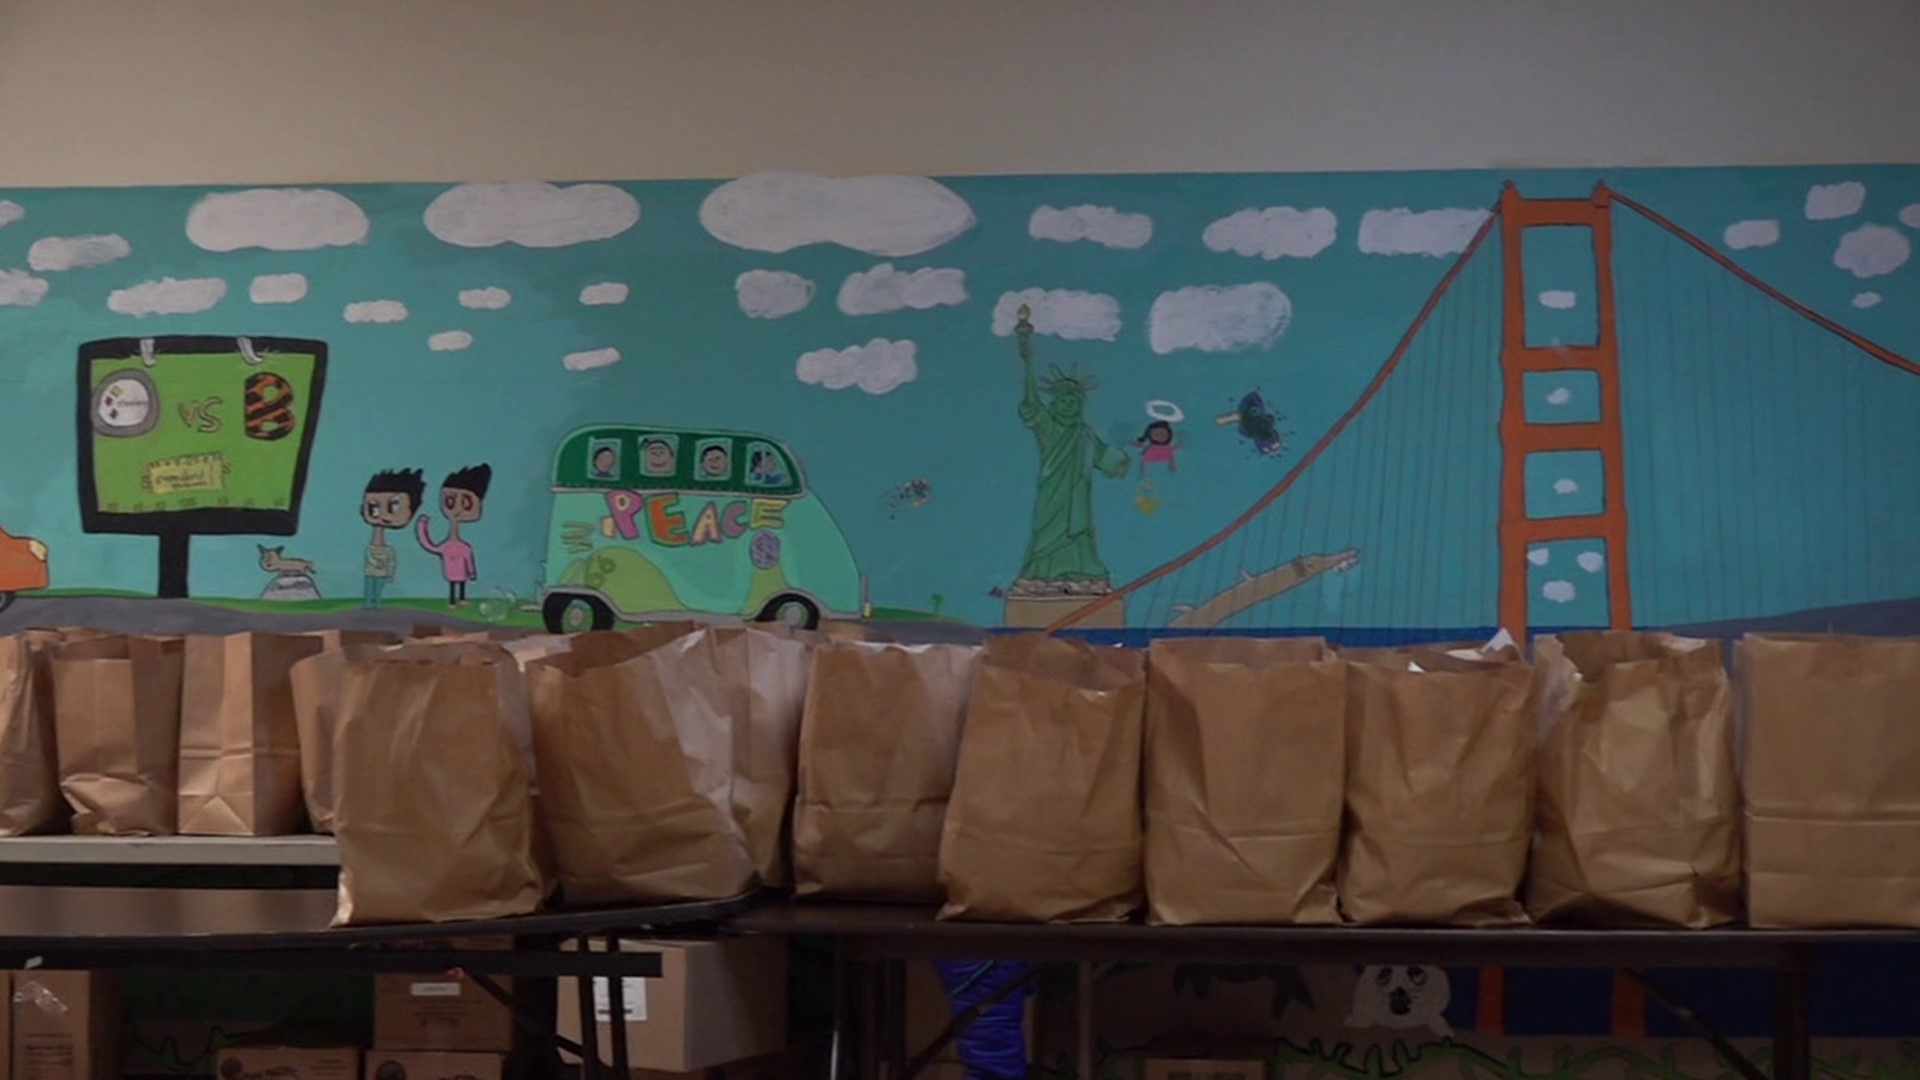 More than 200 food bags will be given away Wednesday morning at the Hazleton One Community Center.